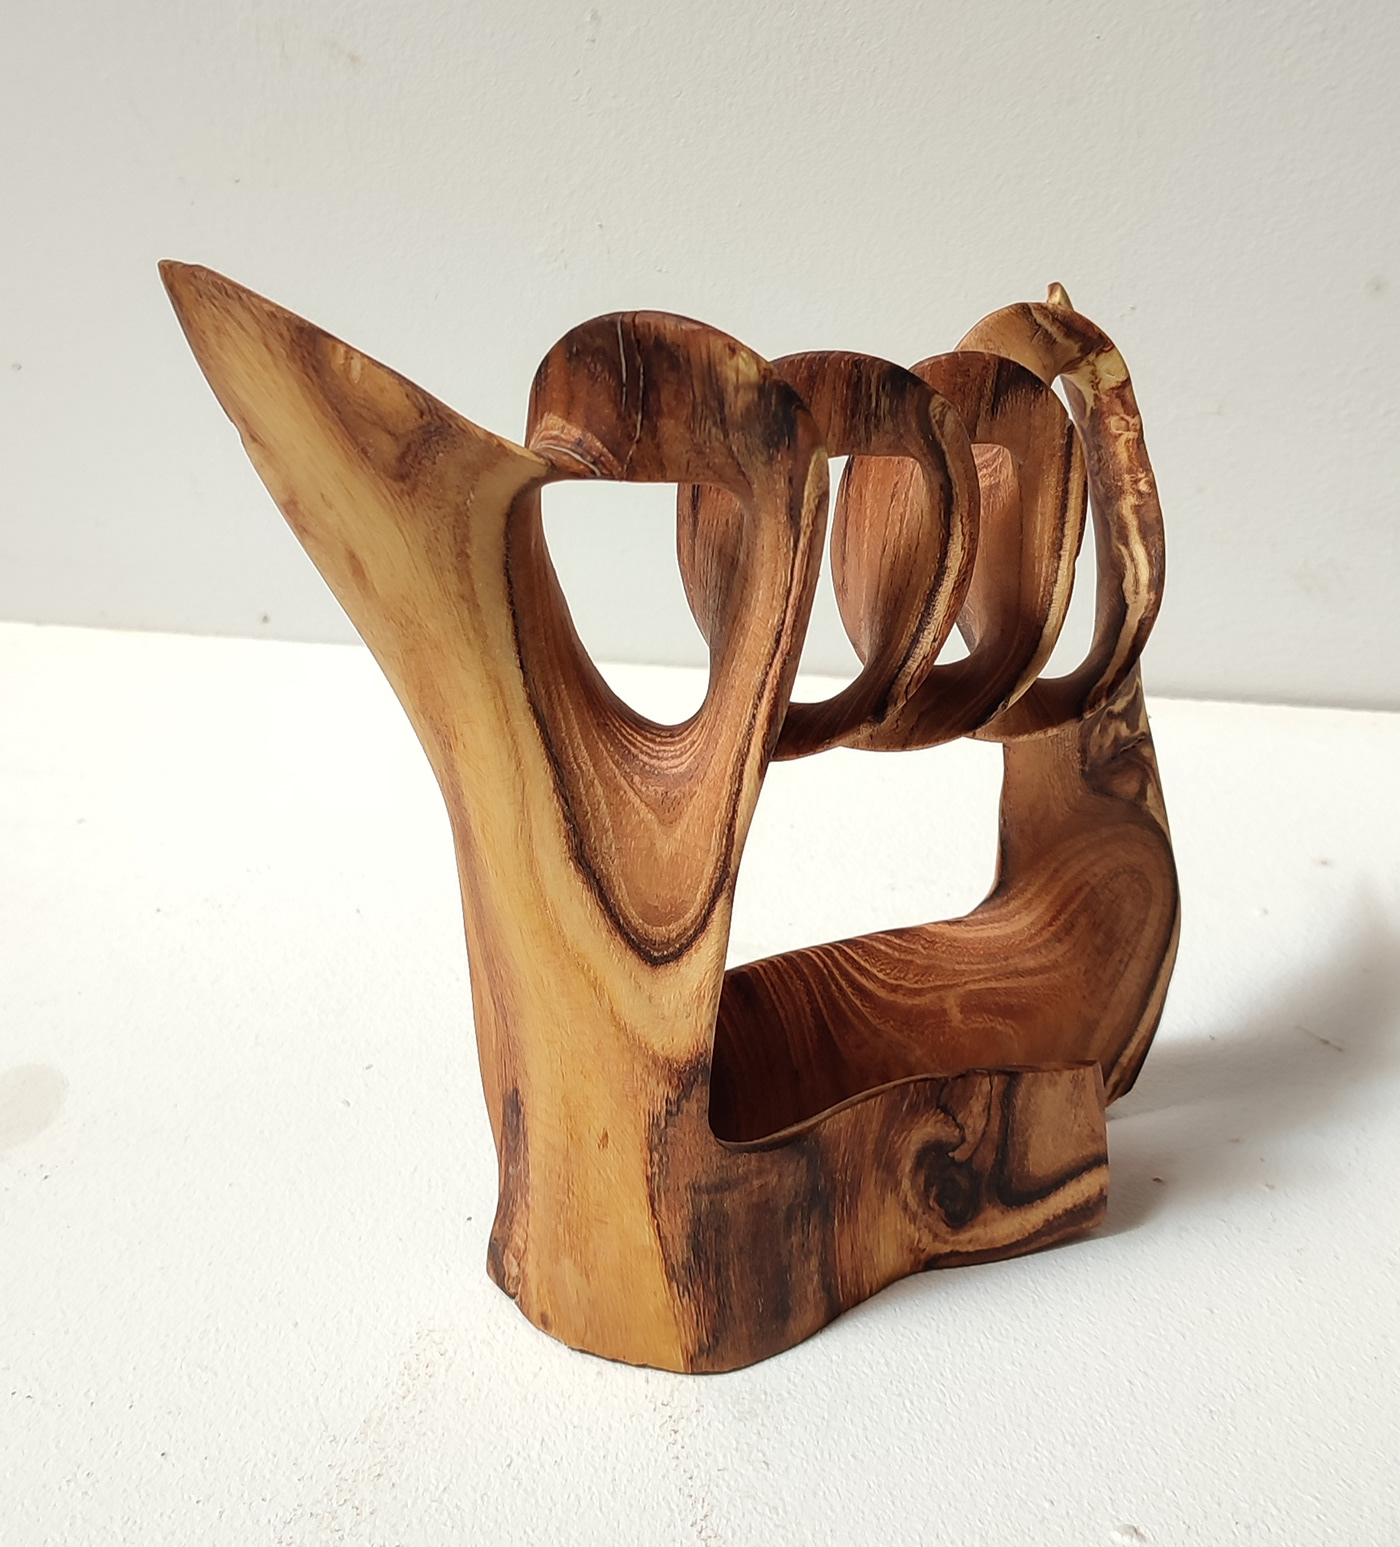 abstract contemporary contemporary art Fusta  madera organic sculting wood woodcarving